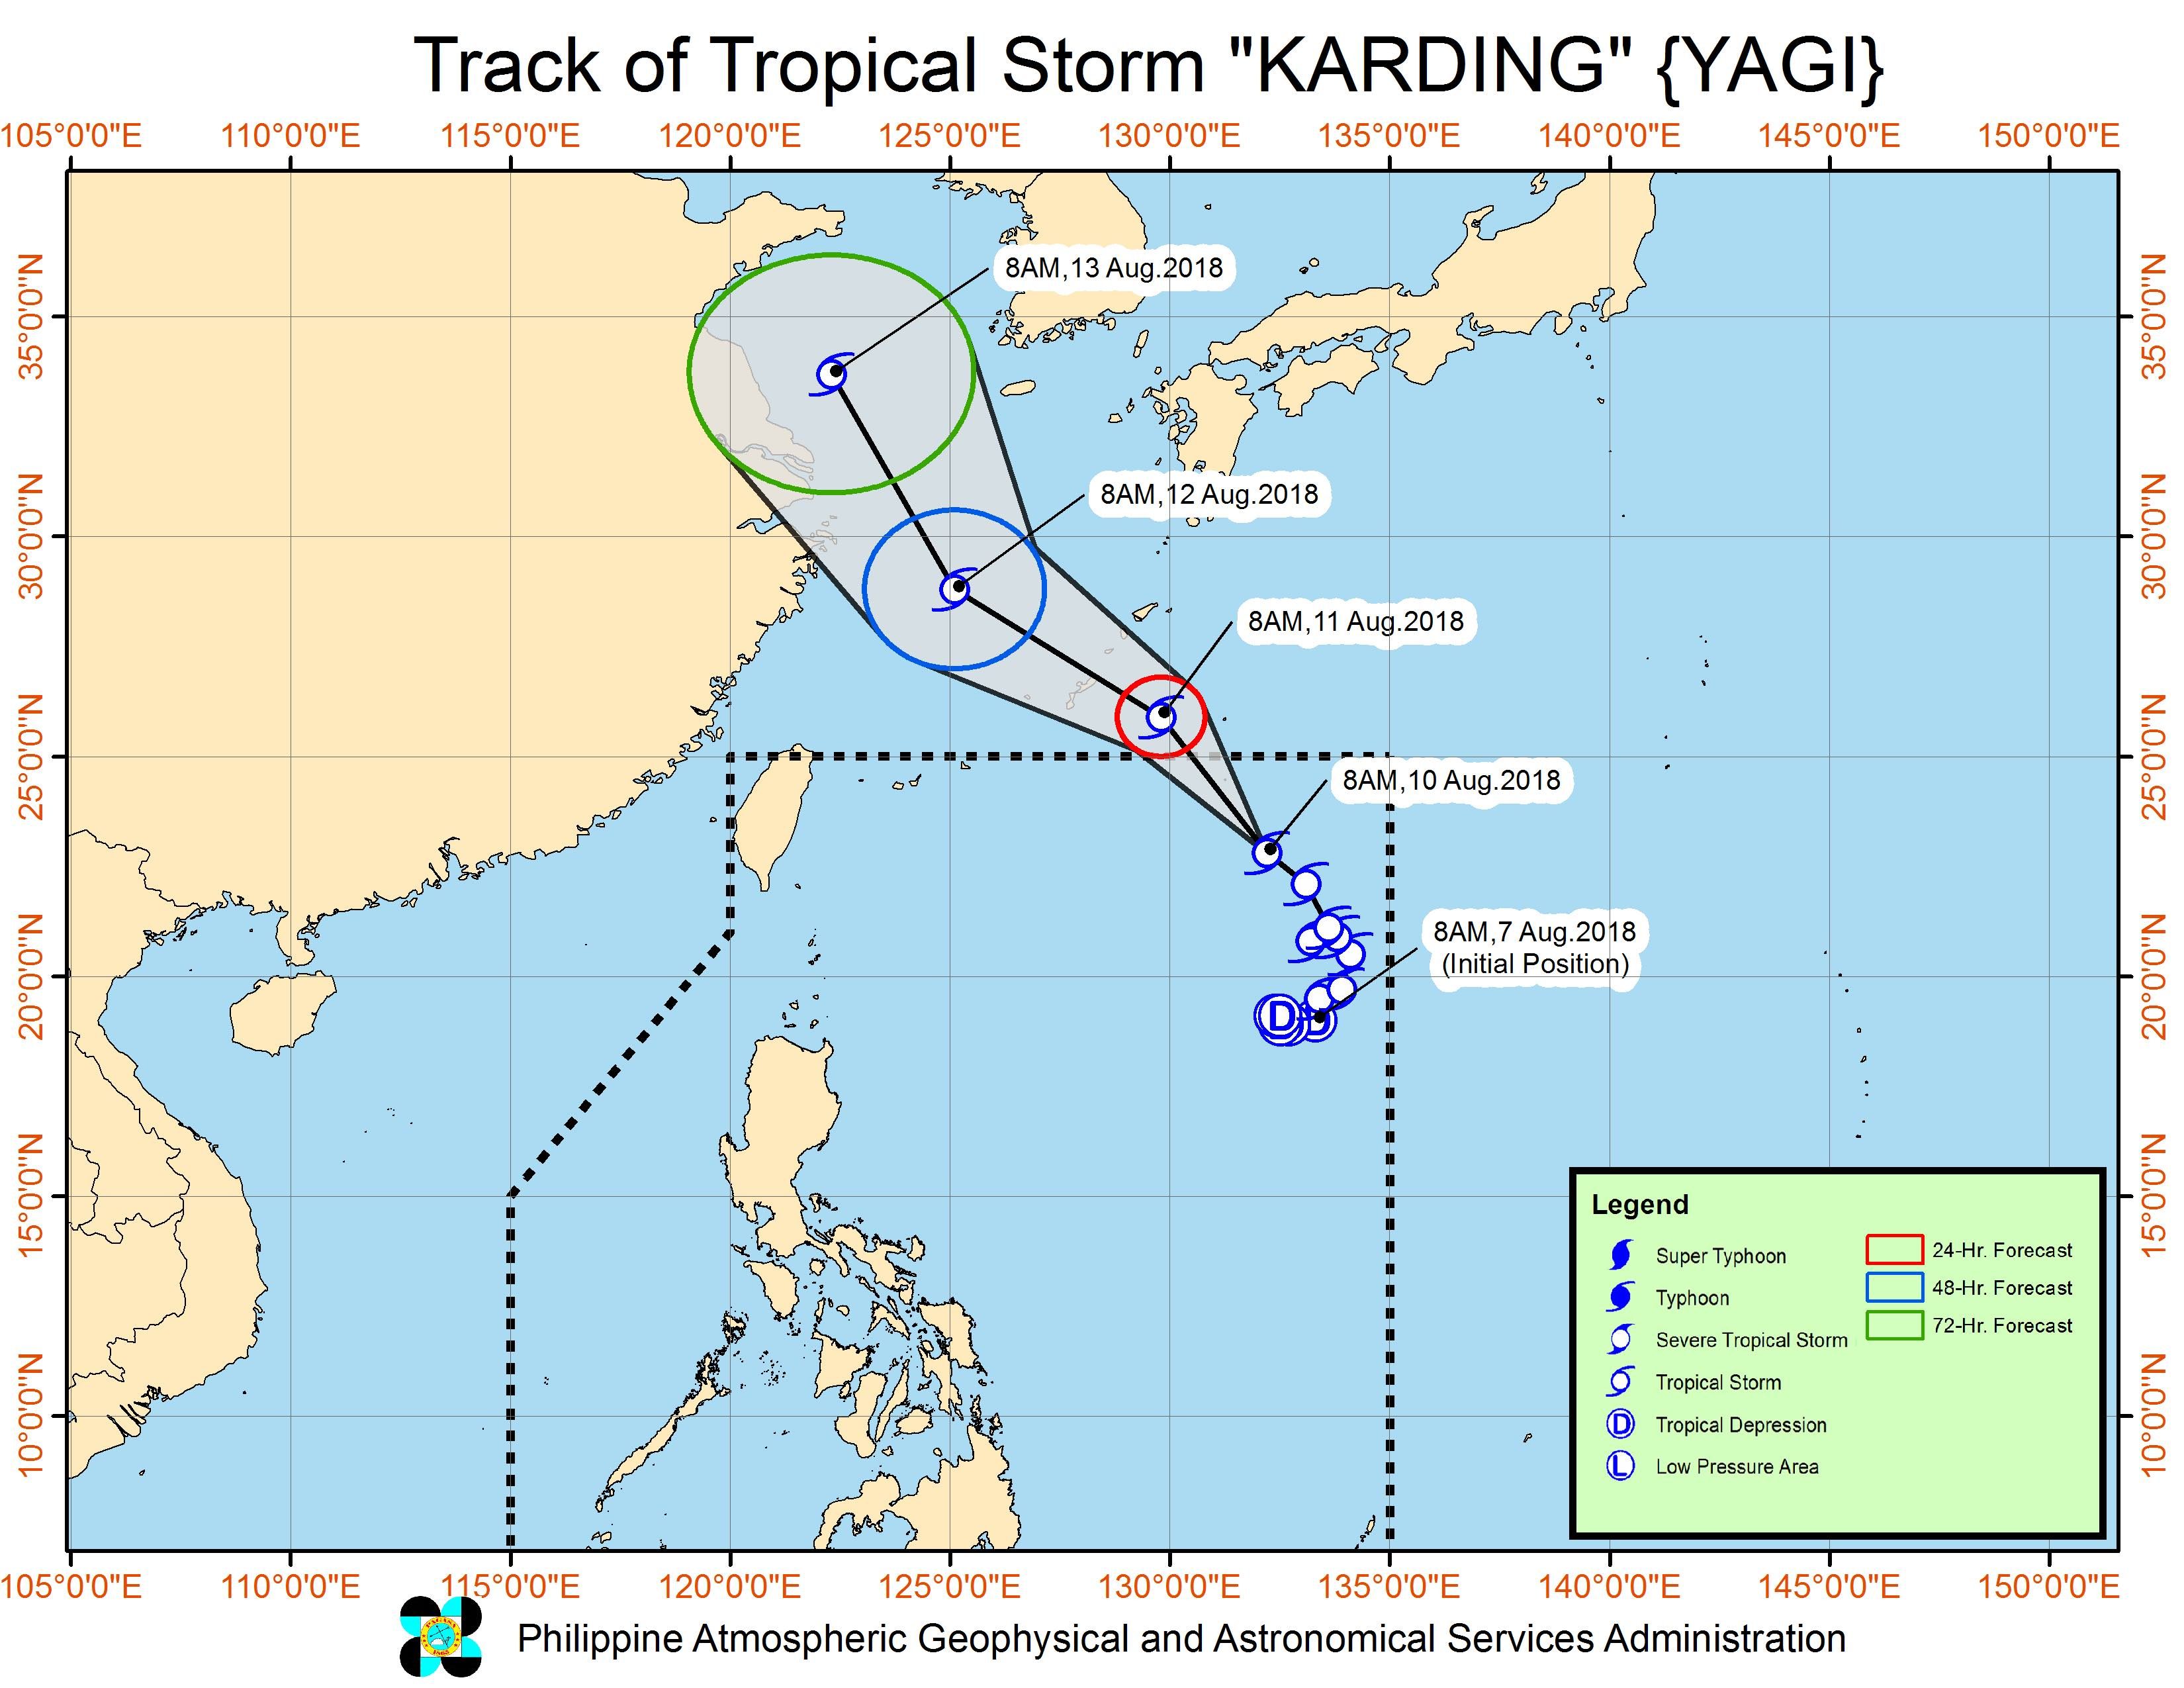 Forecast track of Tropical Storm Karding (Yagi) as of August 10, 2018, 11 am. Image from PAGASA 